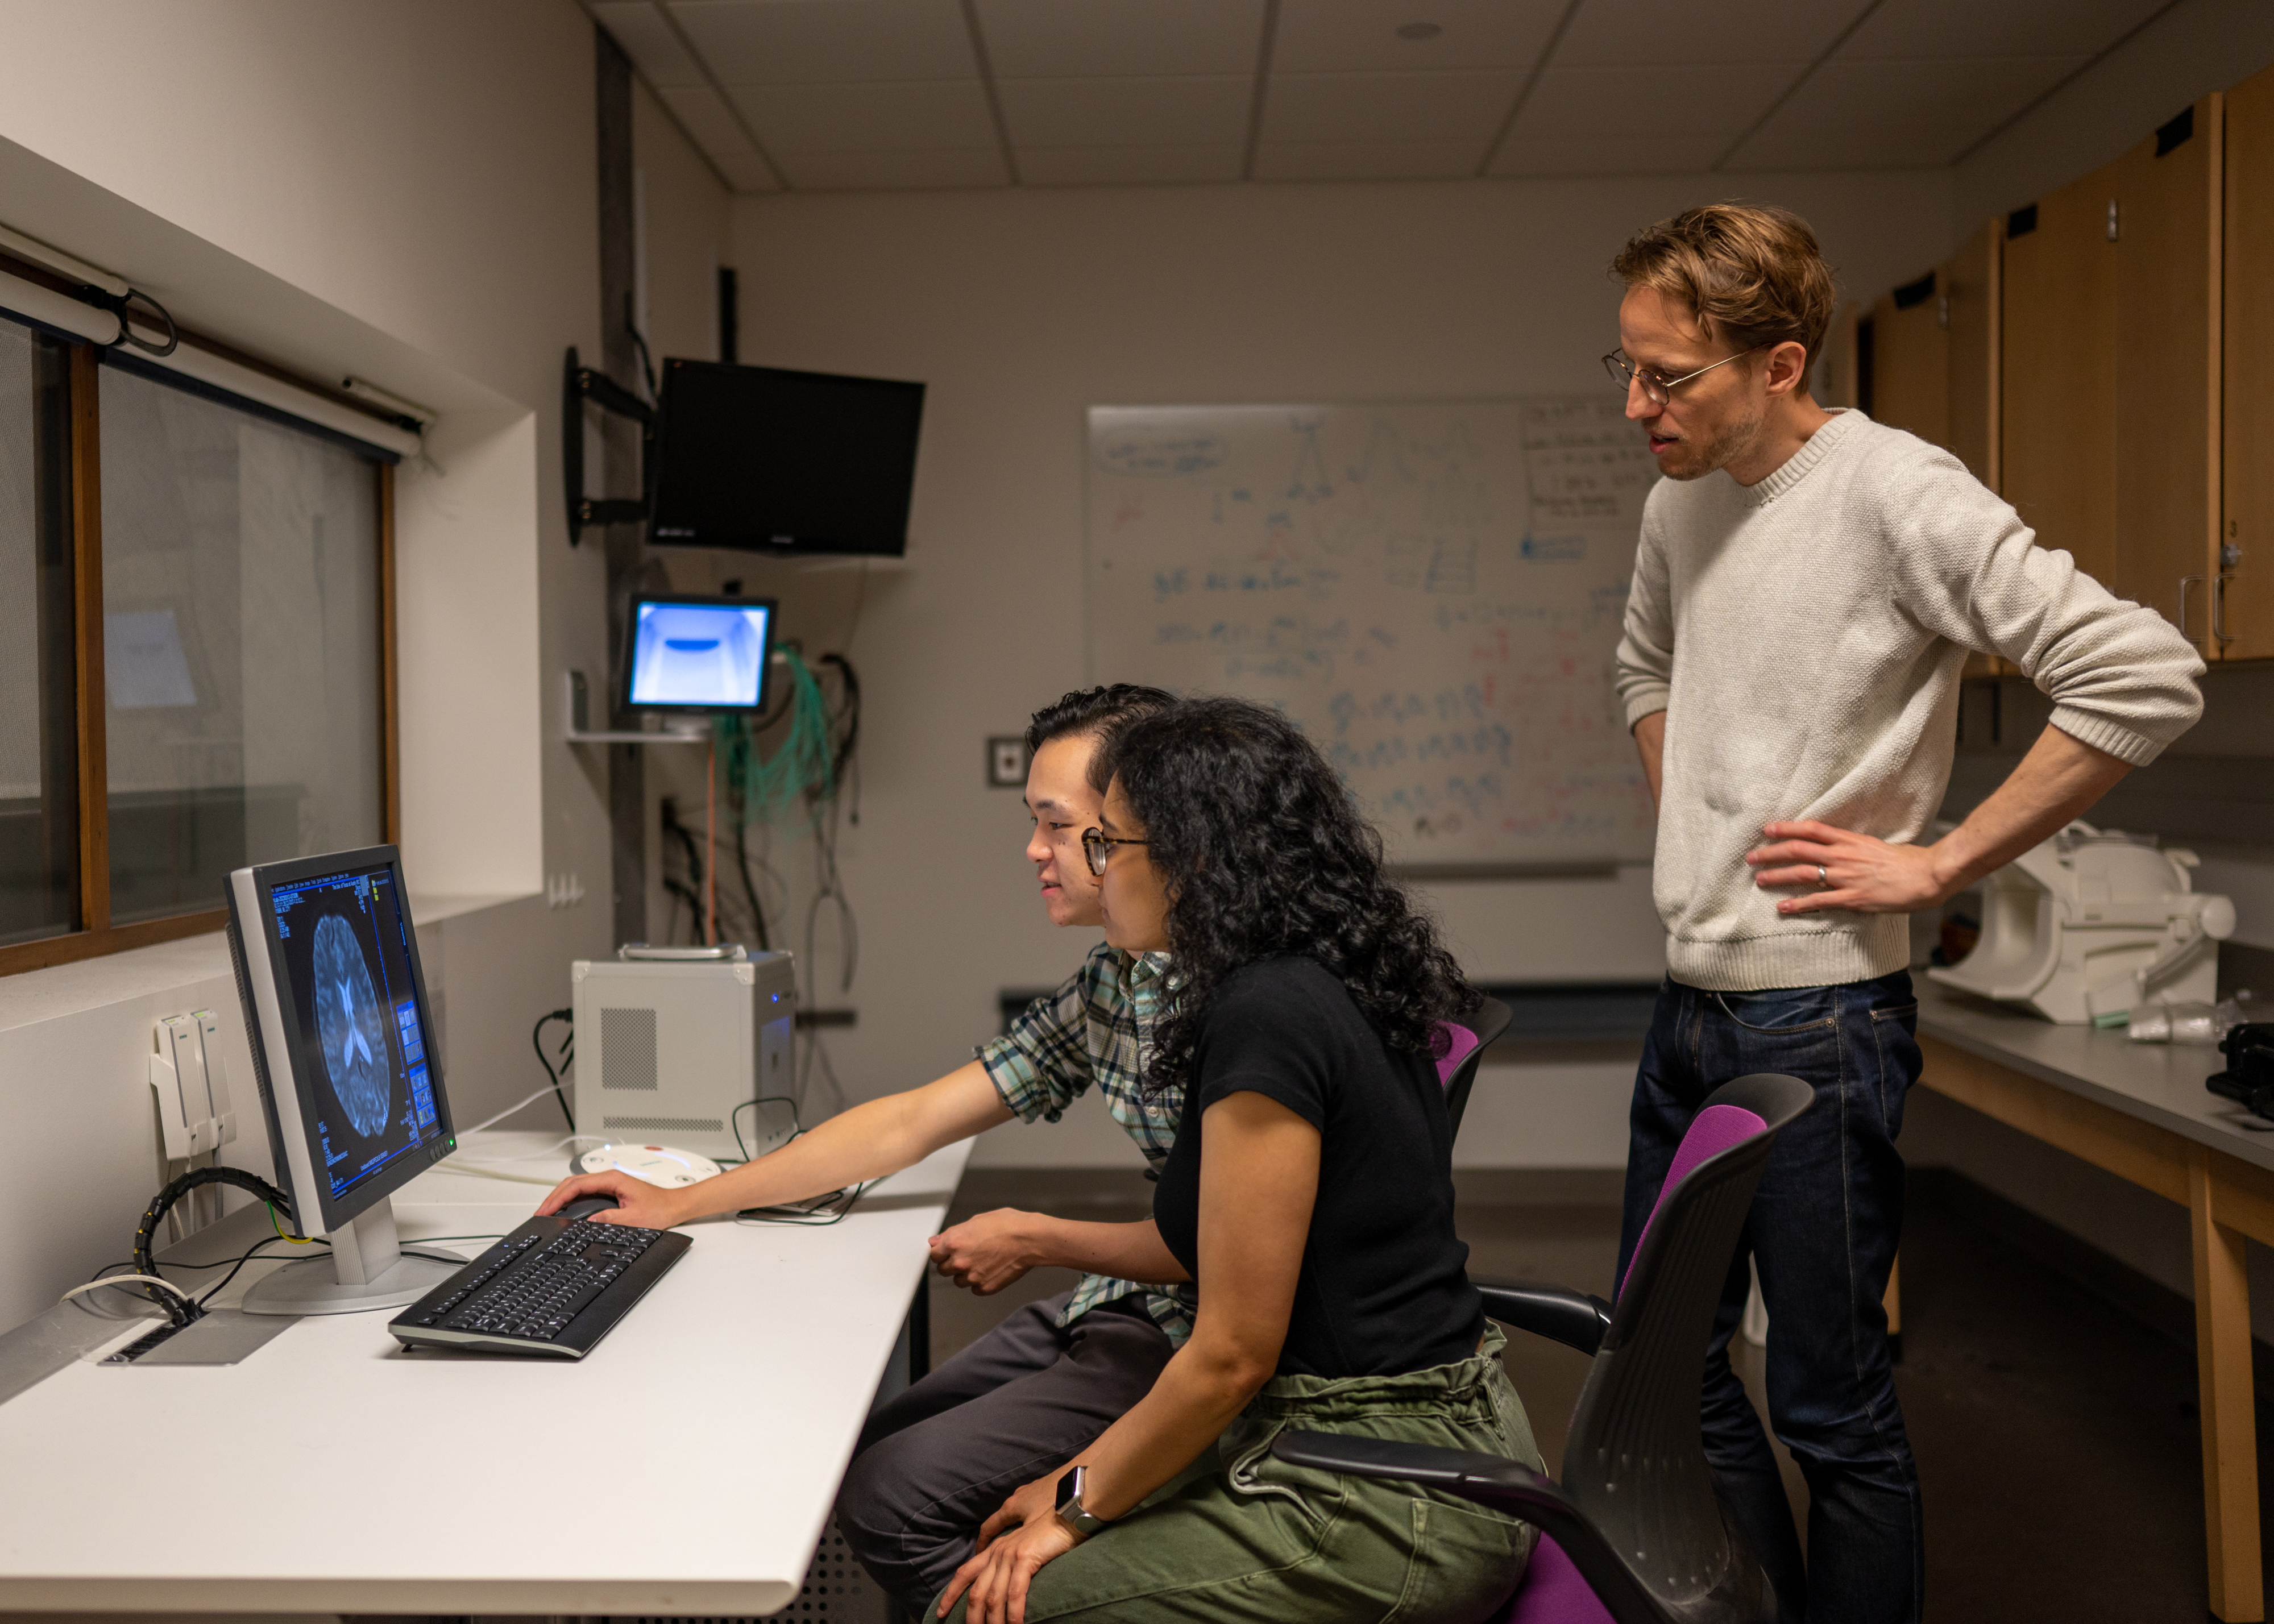 Alex Huth (standing), discusses the semantic decoder project with Jerry Tang (left) and Shailee Jain (right) in the Biomedical Imaging Center at the University of Texas at Austin. The researchers trained their semantic decoder on dozens of hours of brain activity data from participants, collected in an FMRI scanner. Image: Nolan Zunk/University of Texas at Austin.